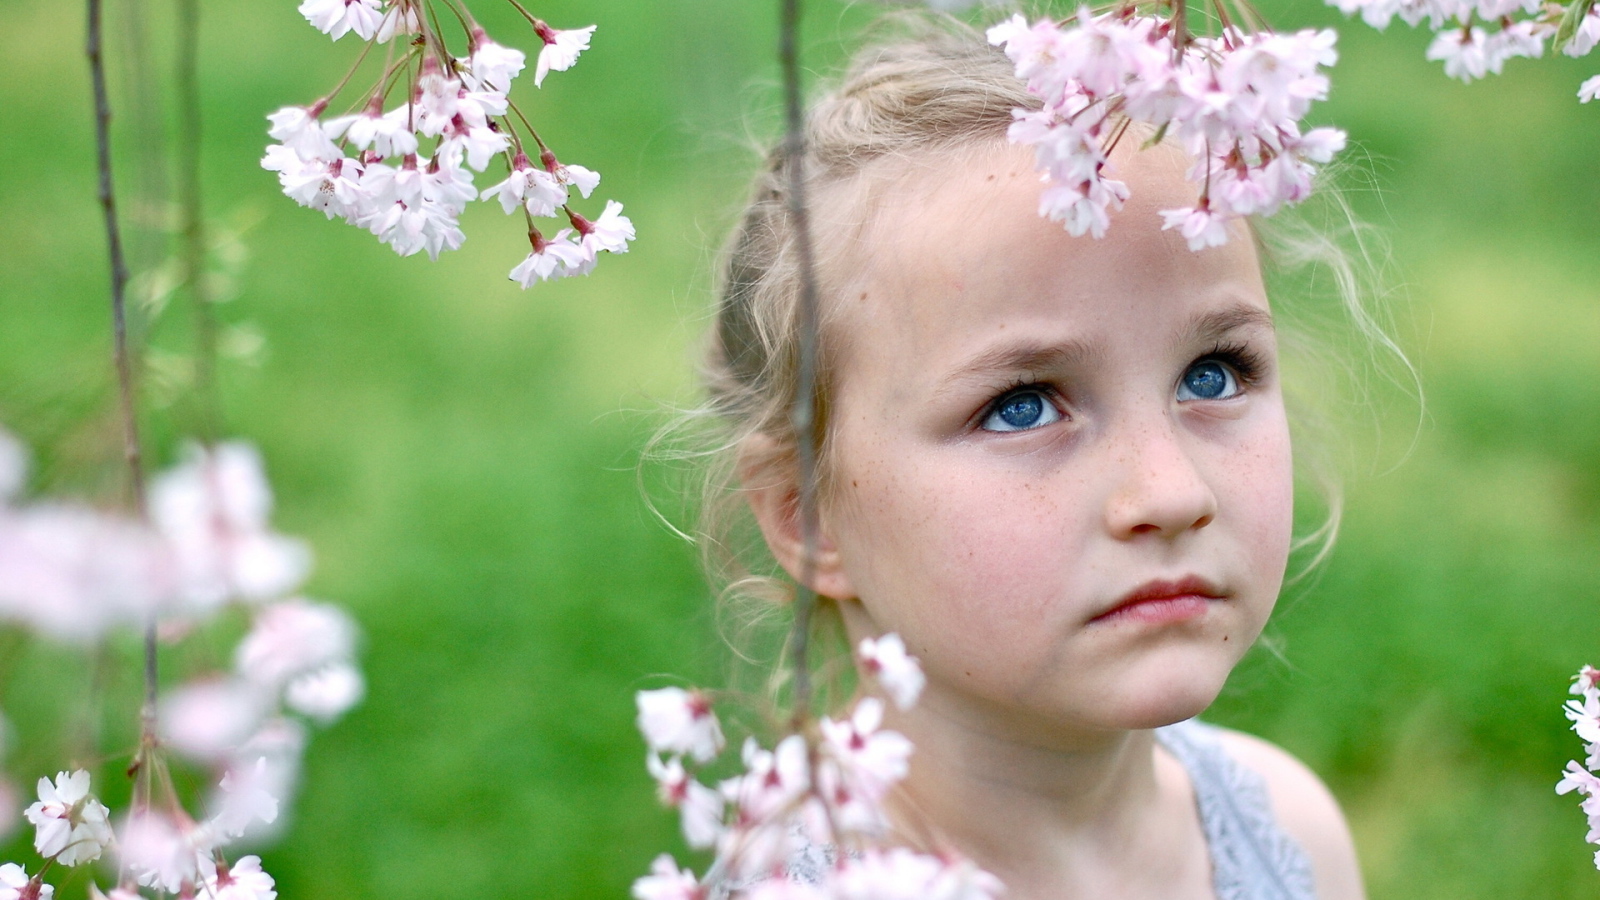 A little blue-eyed girl with branches of spring flowers